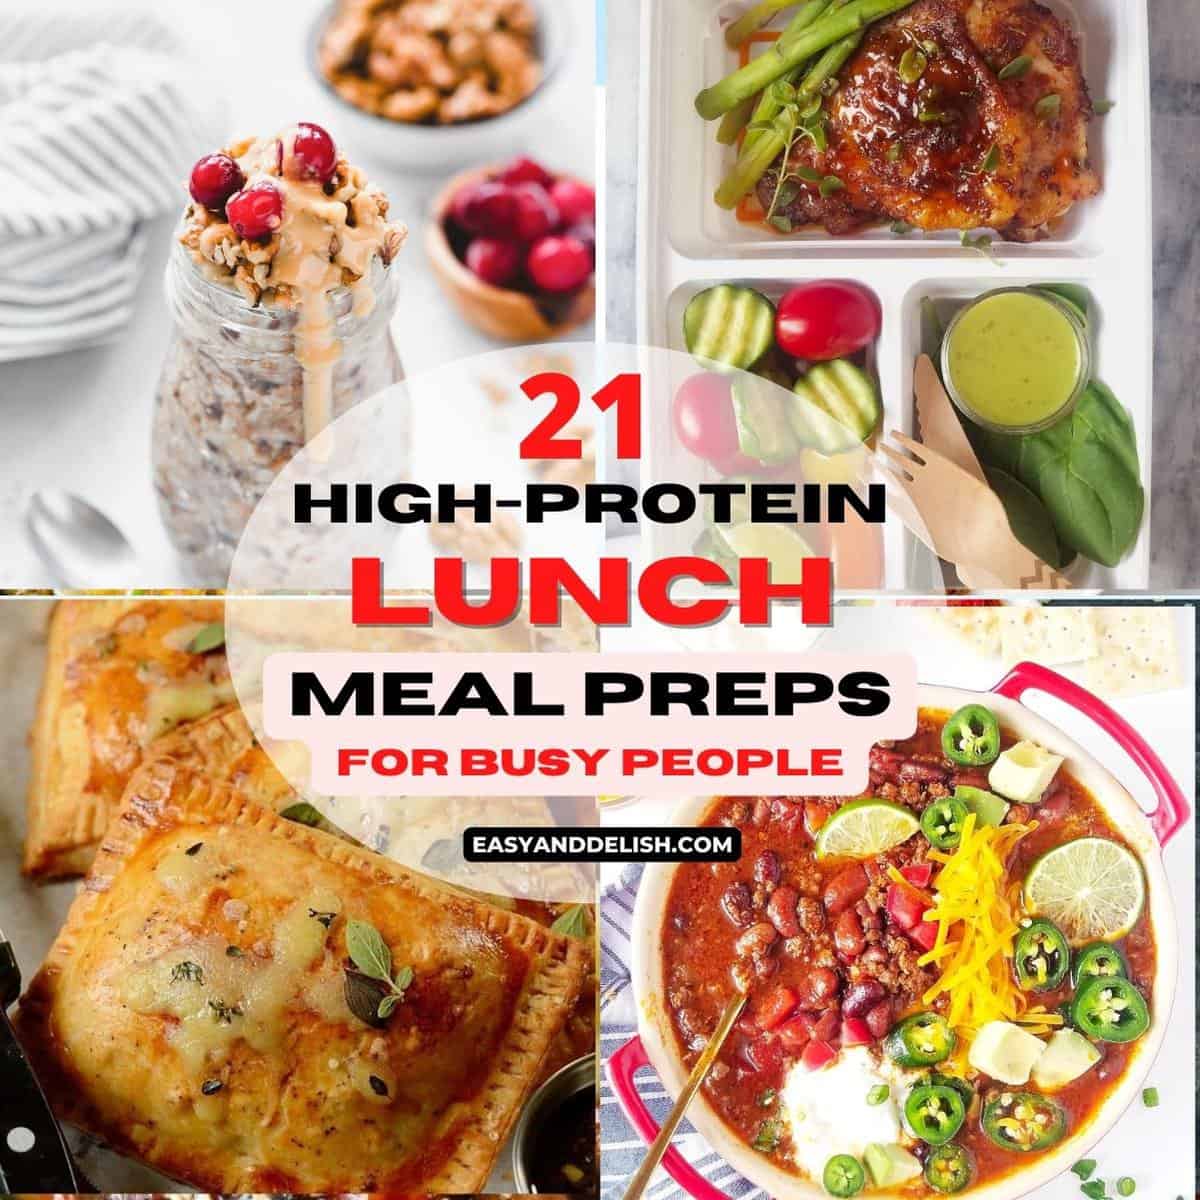 https://www.easyanddelish.com/wp-content/uploads/2022/07/HIGH-PROTEIN-LUNCH-MEAL-PREPS-FEATURED.jpg